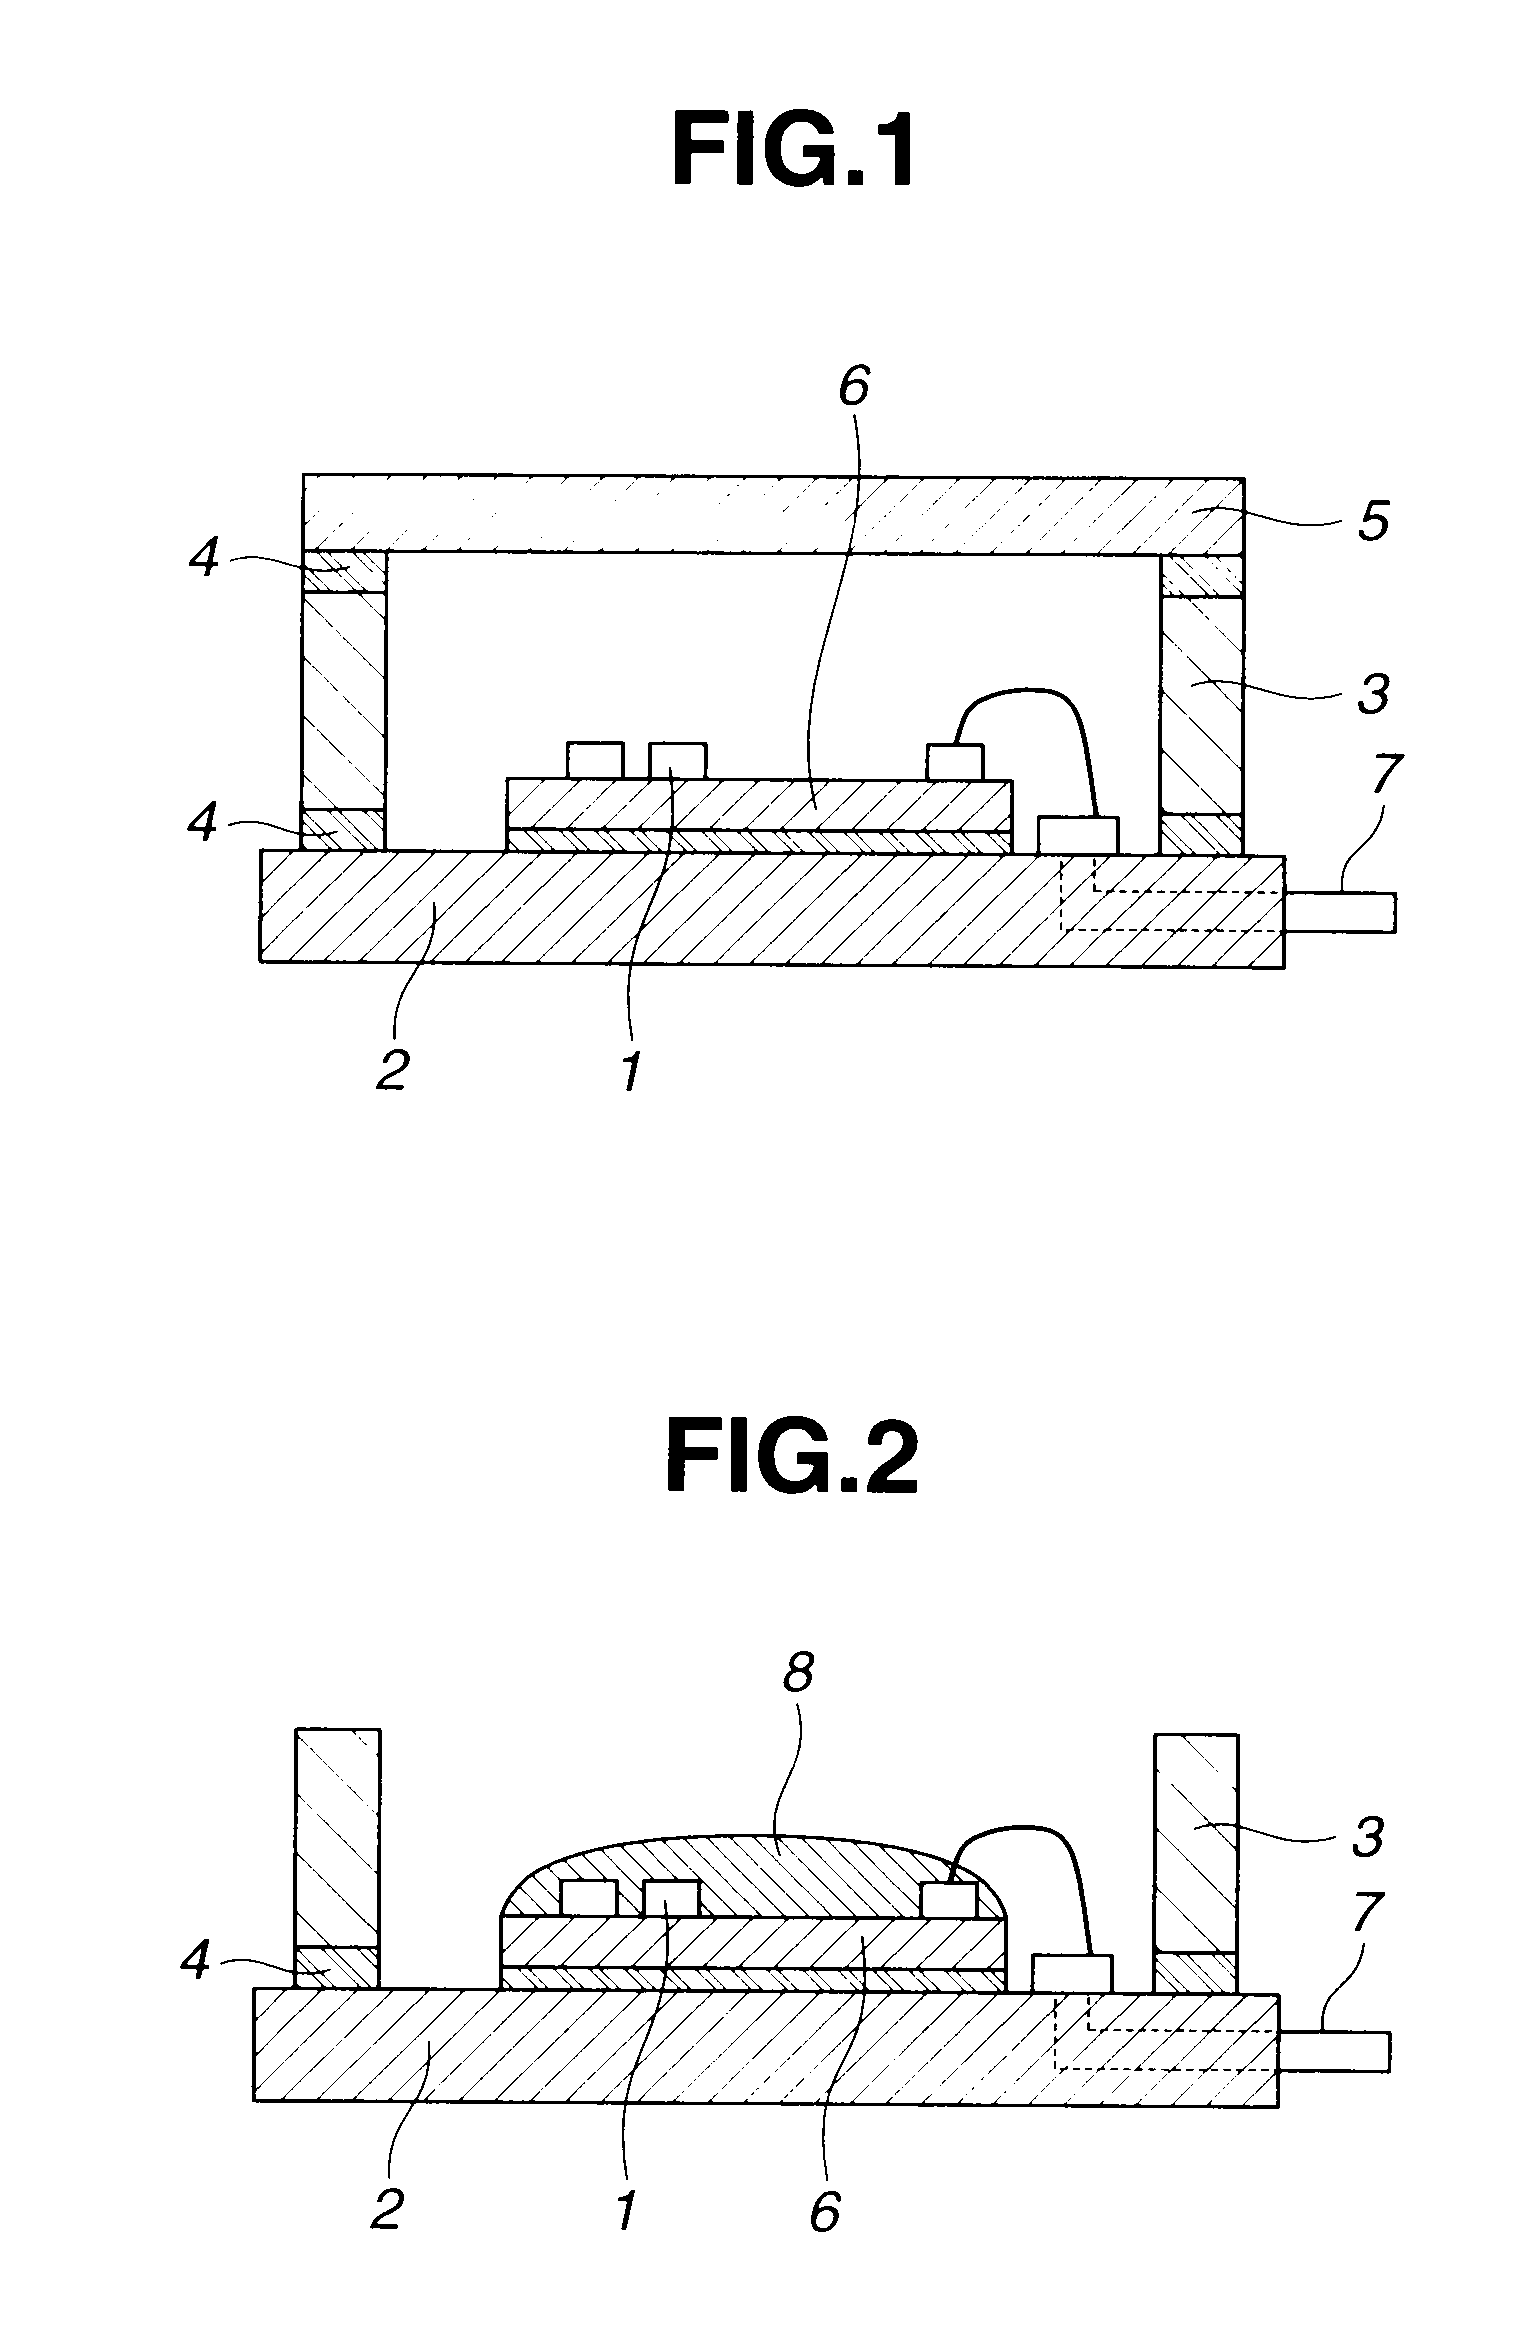 Automotive electric/electronic package